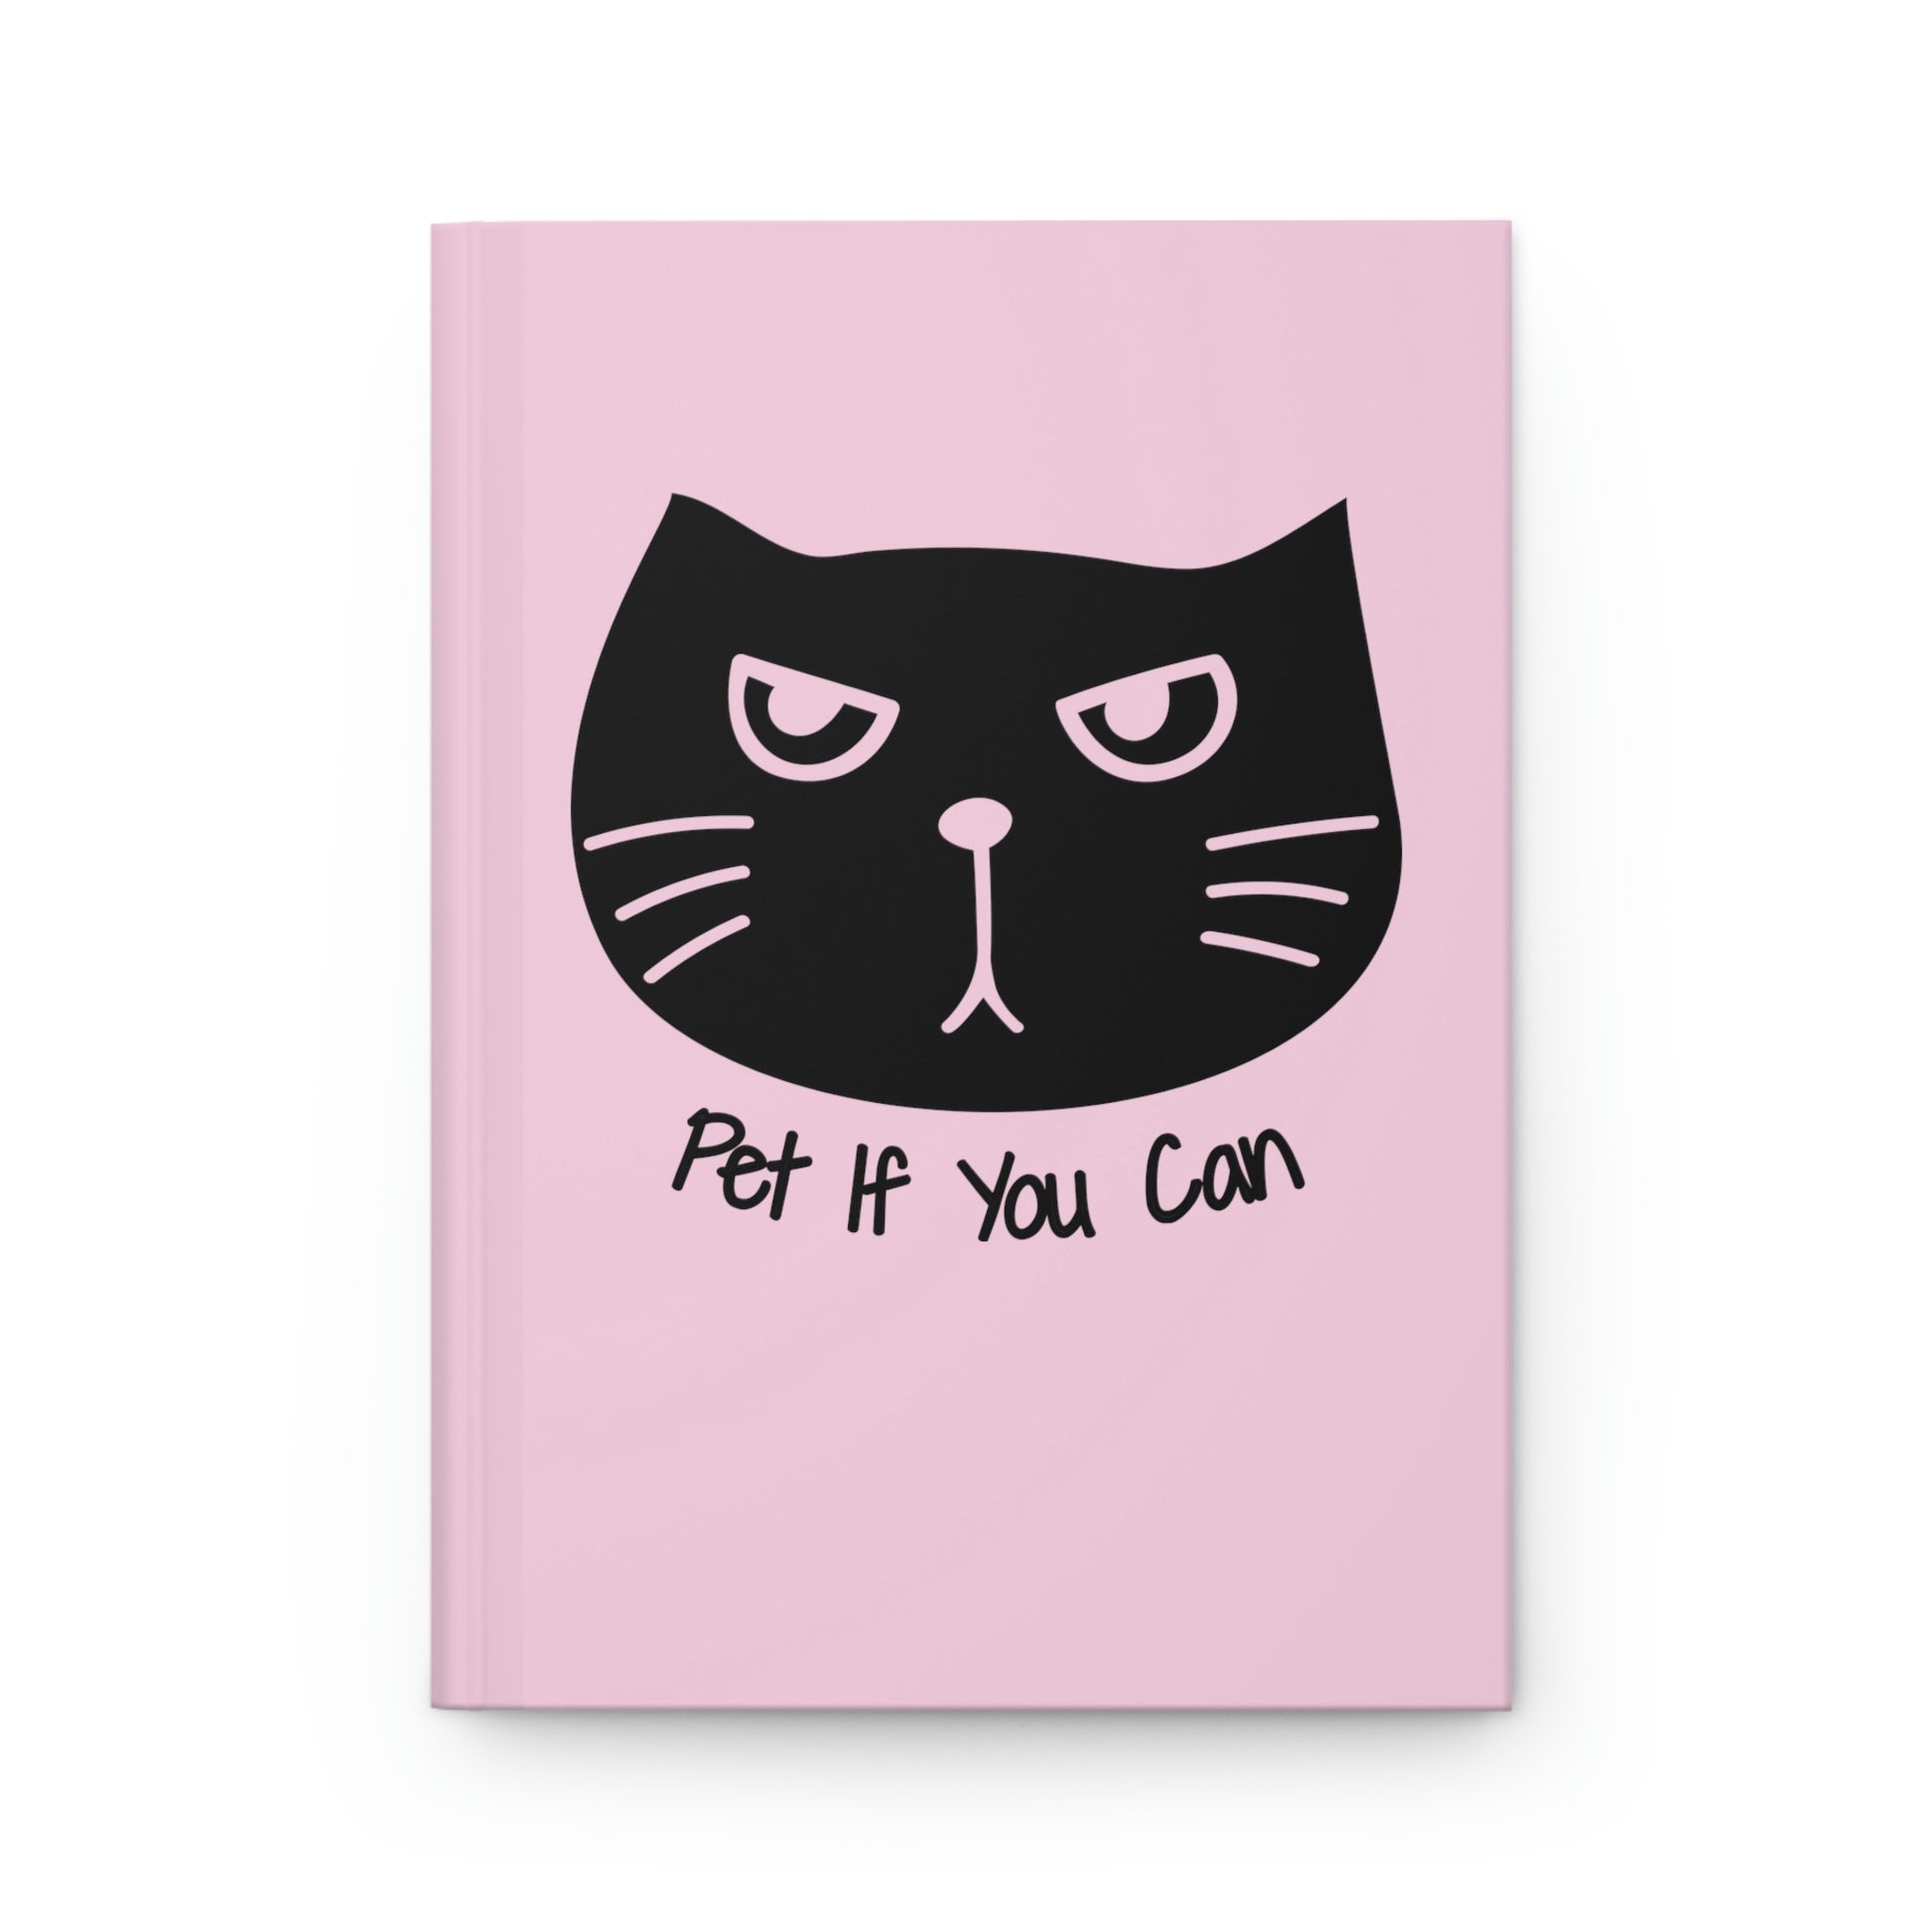 Funny cat says "Pet If You Can" pink Hardcover Journal Matte notebook, cat traveler notebook, Coworker cat Gift, cat lover gift